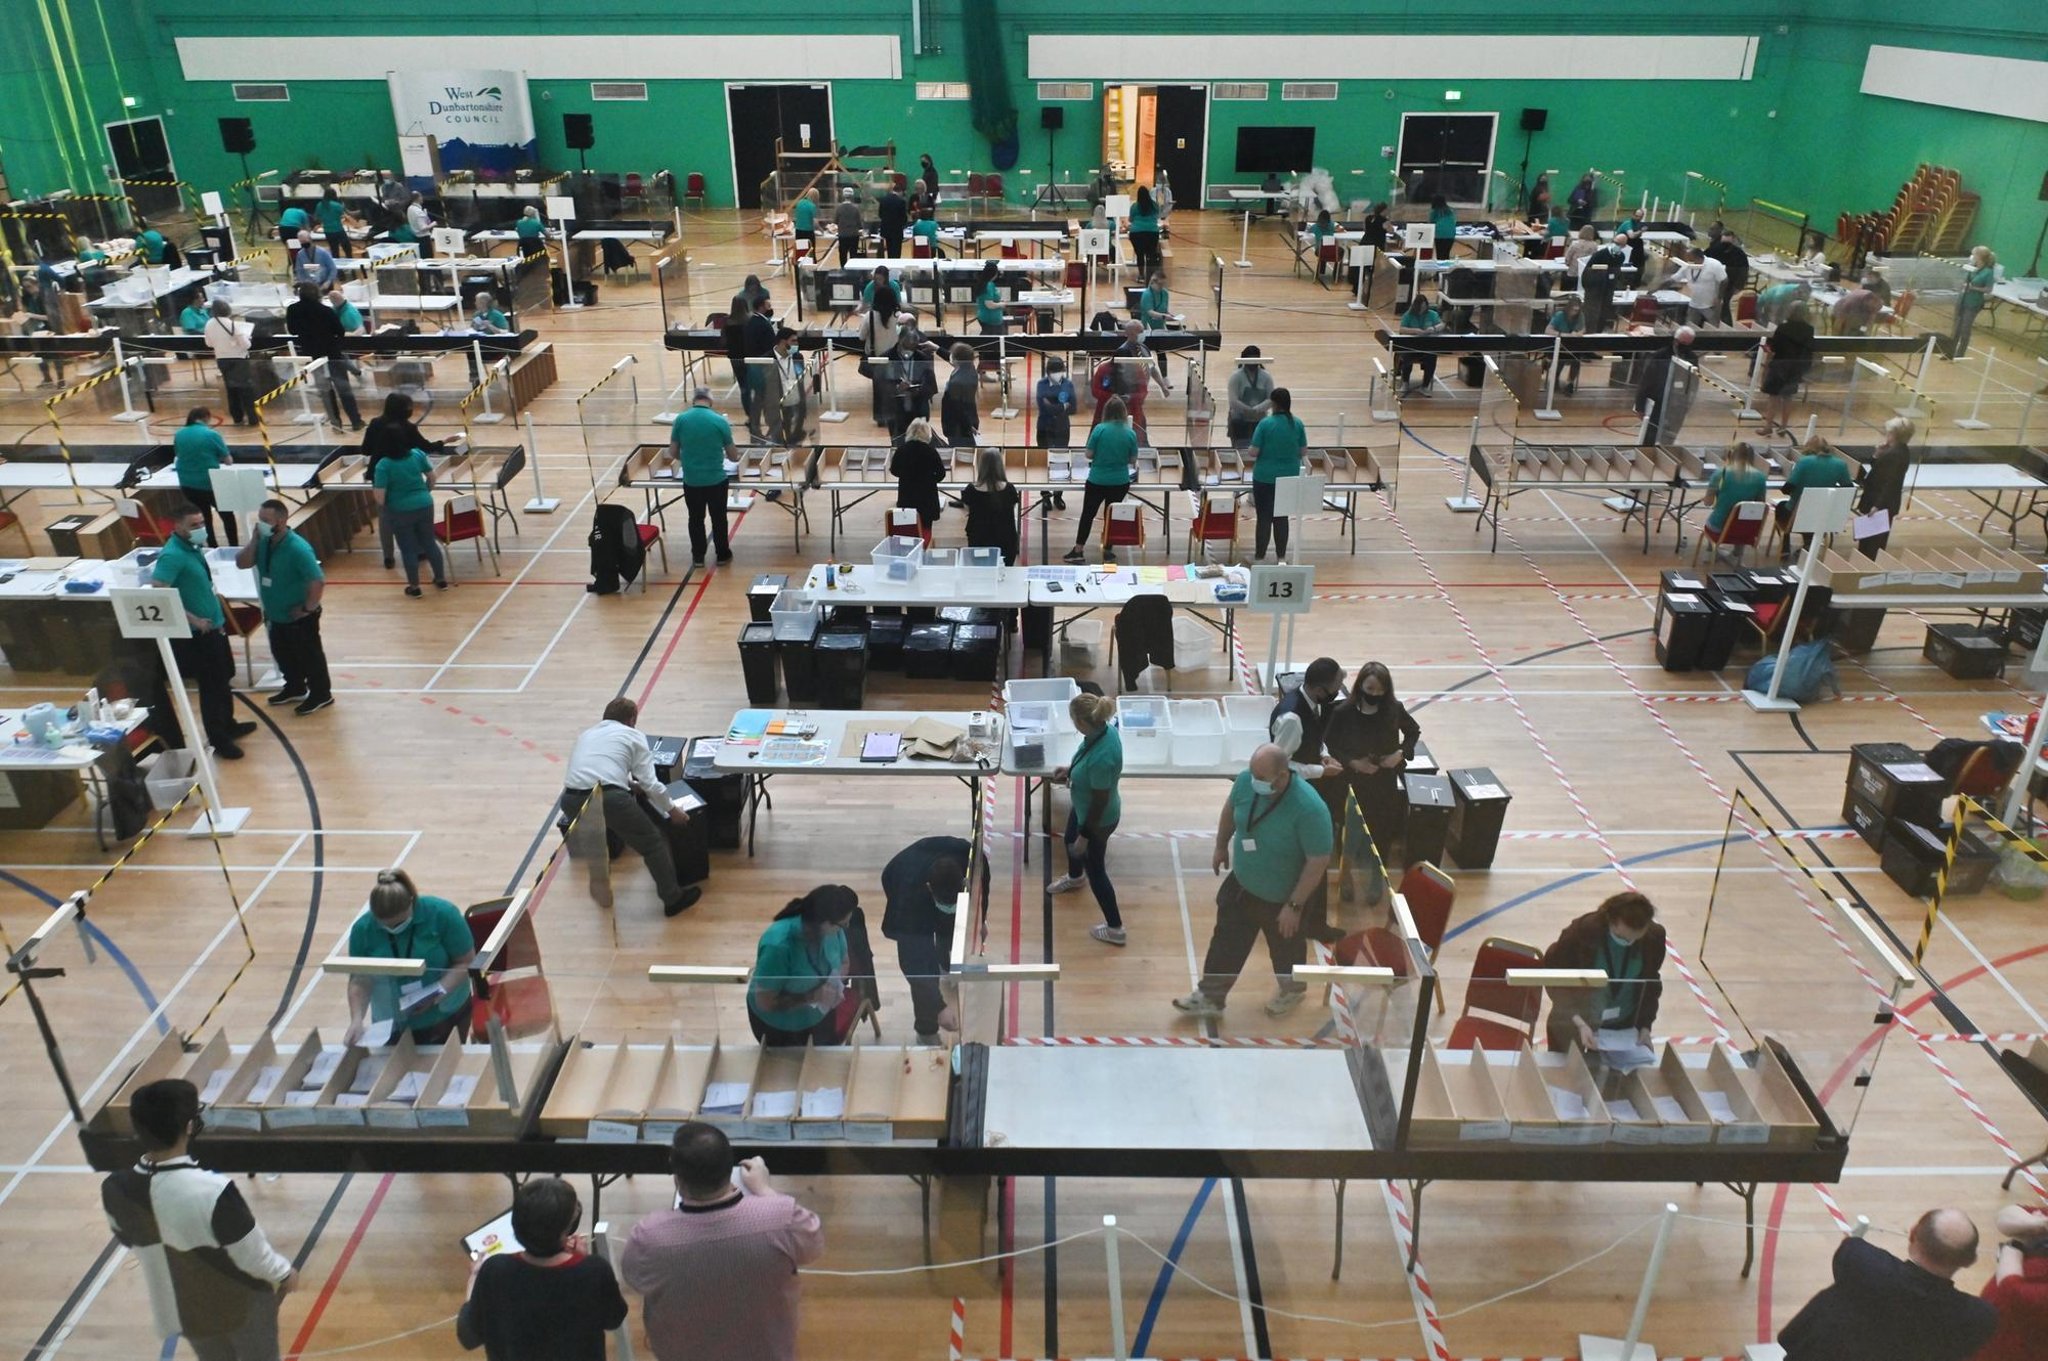 Scottish Election 2021 results: What do the early turnout figures mean?